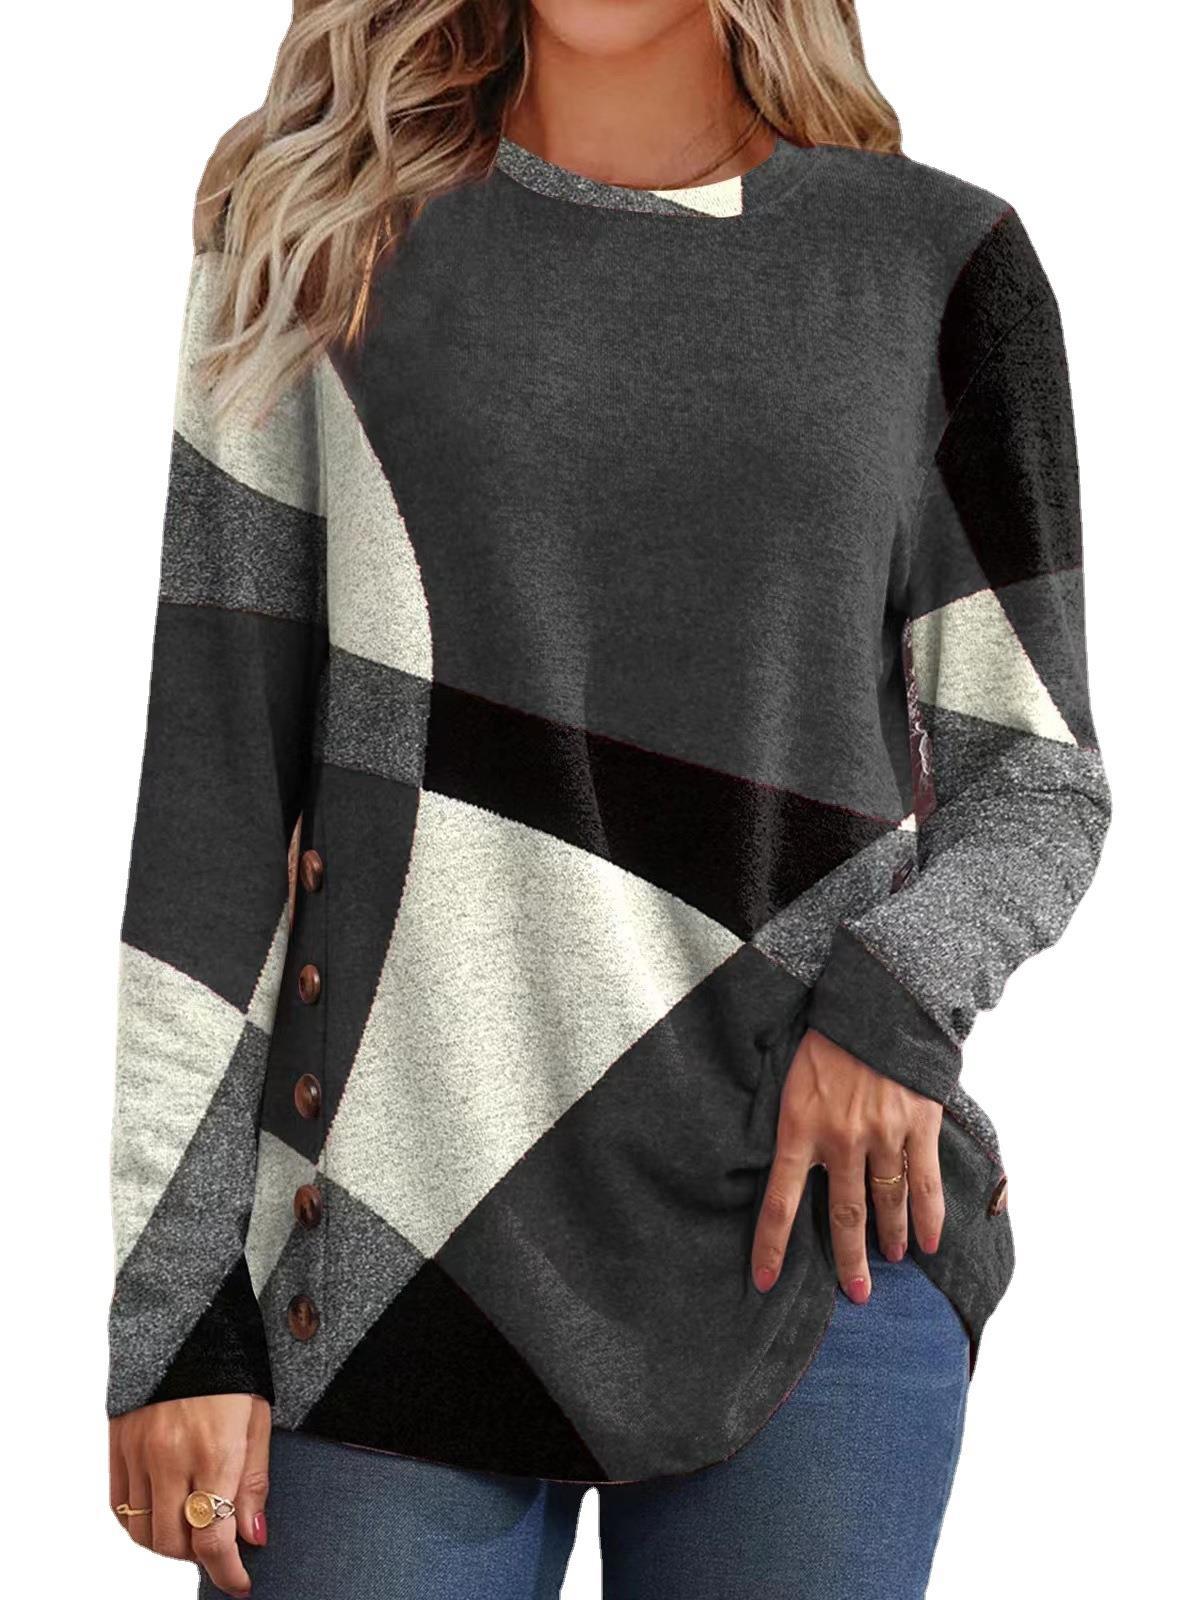 Women's French Cashmere Printing Color Contrast Long-sleeved Blouses